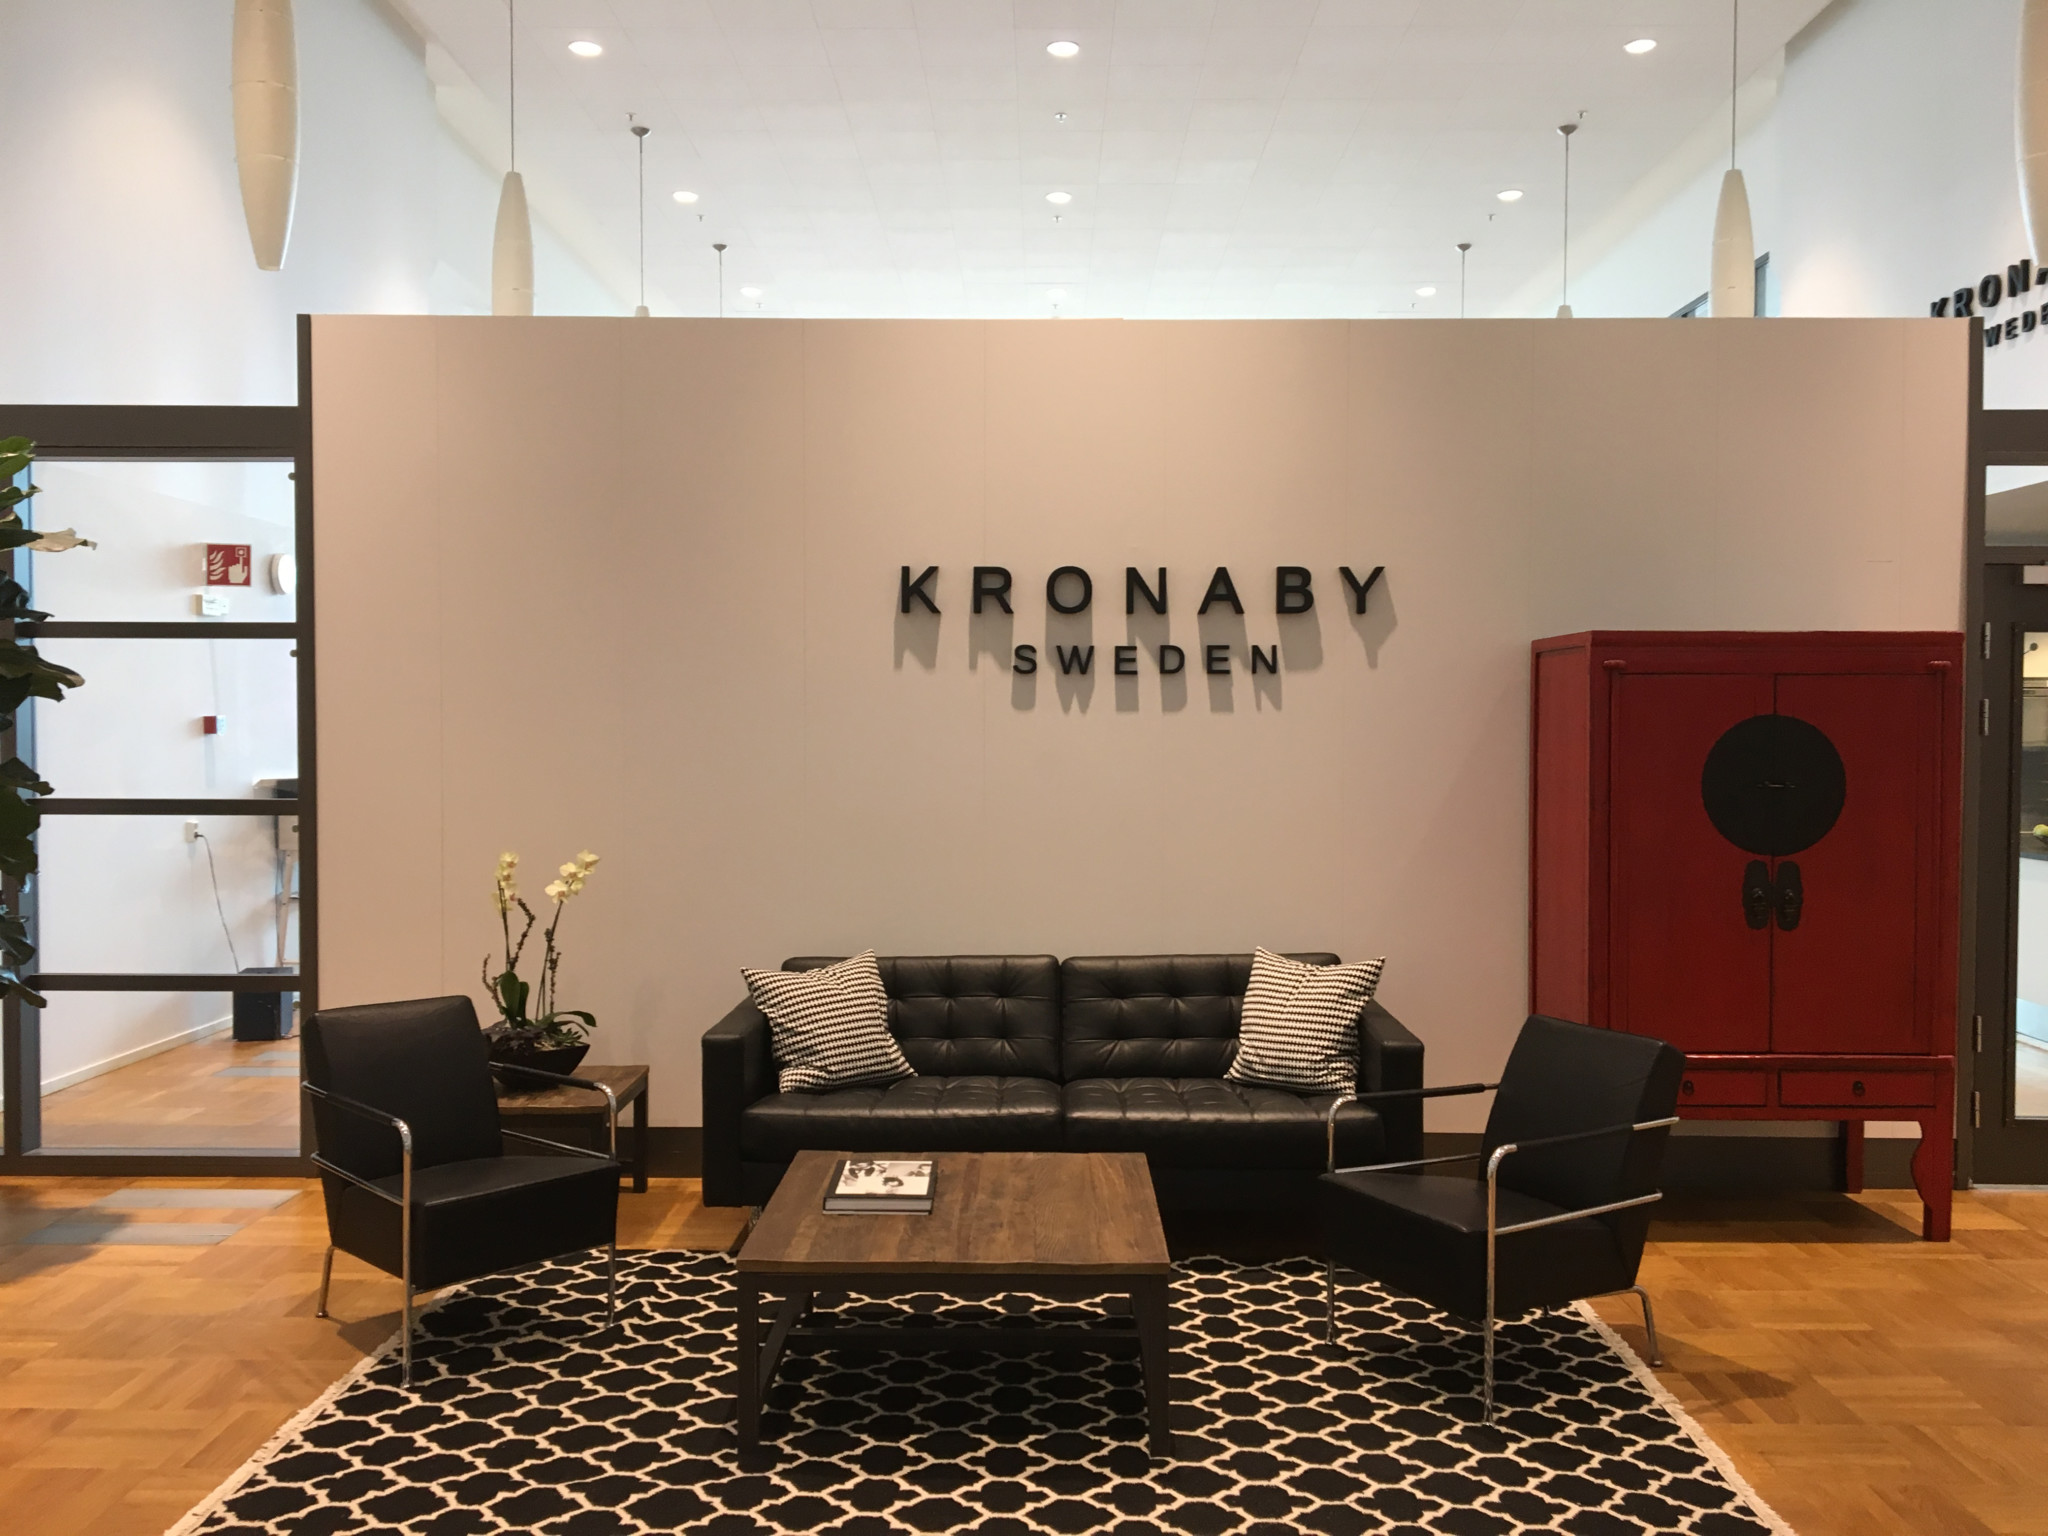 Kronaby is located in a building that previously housed a submarine maker.